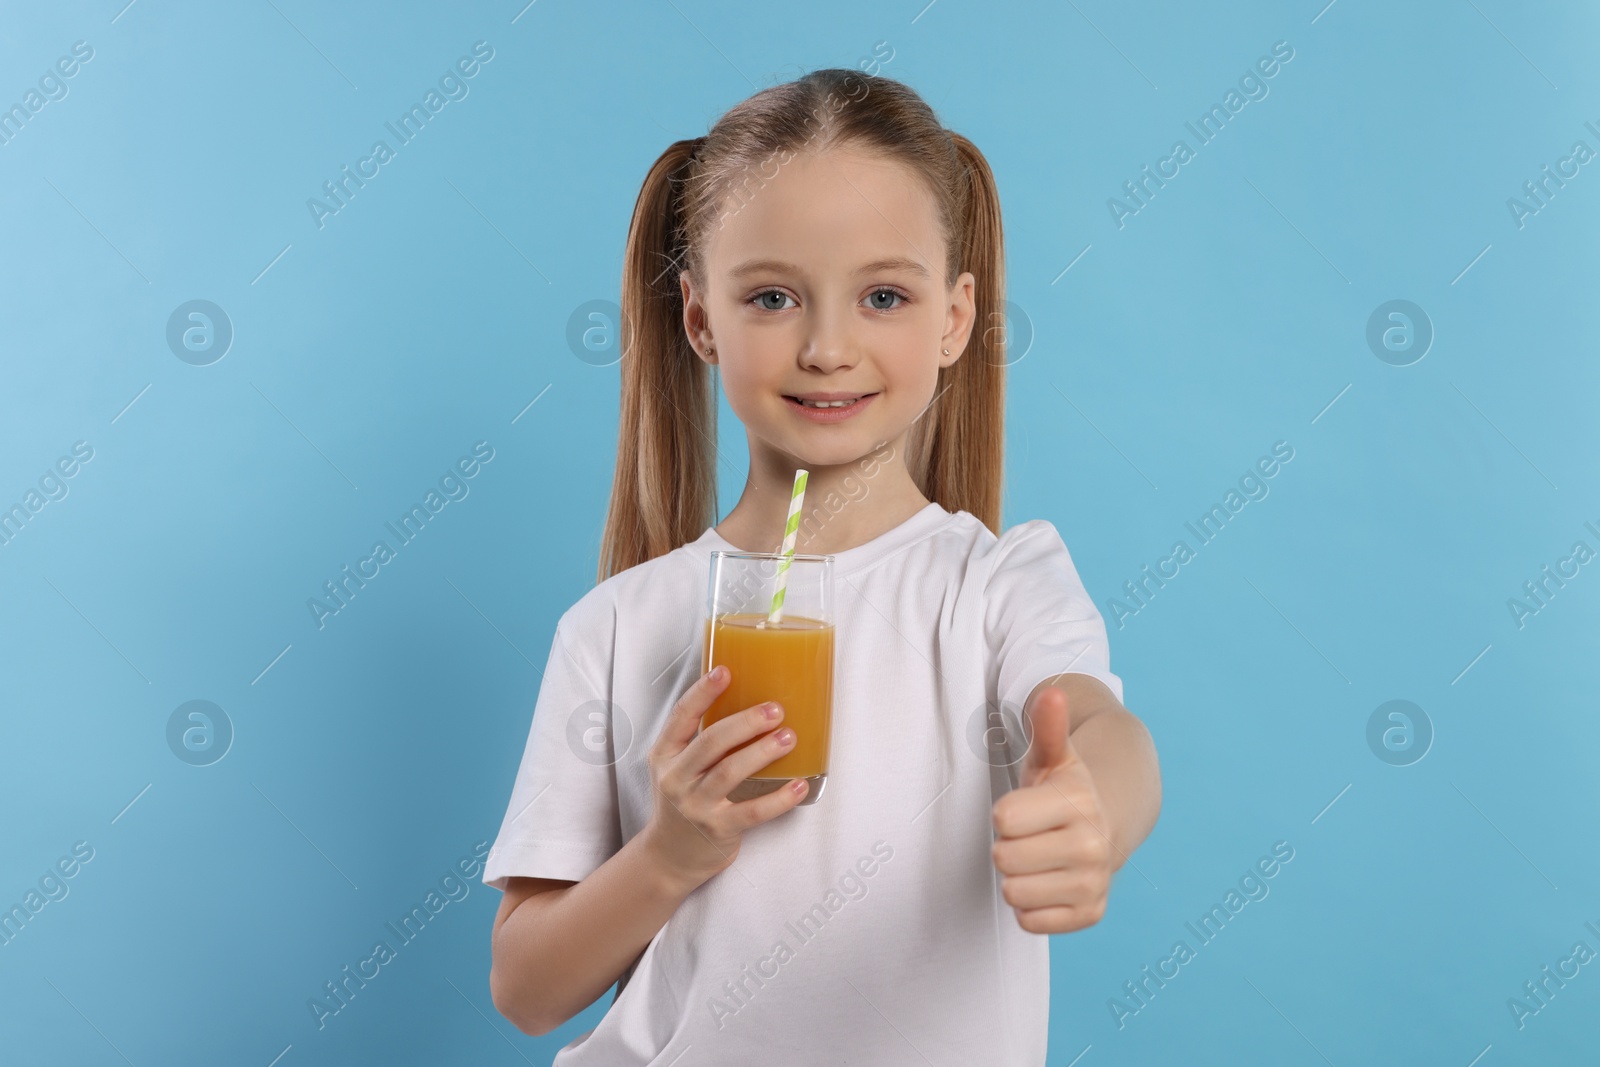 Photo of Cute little girl with fresh juice showing thumbs up on light blue background